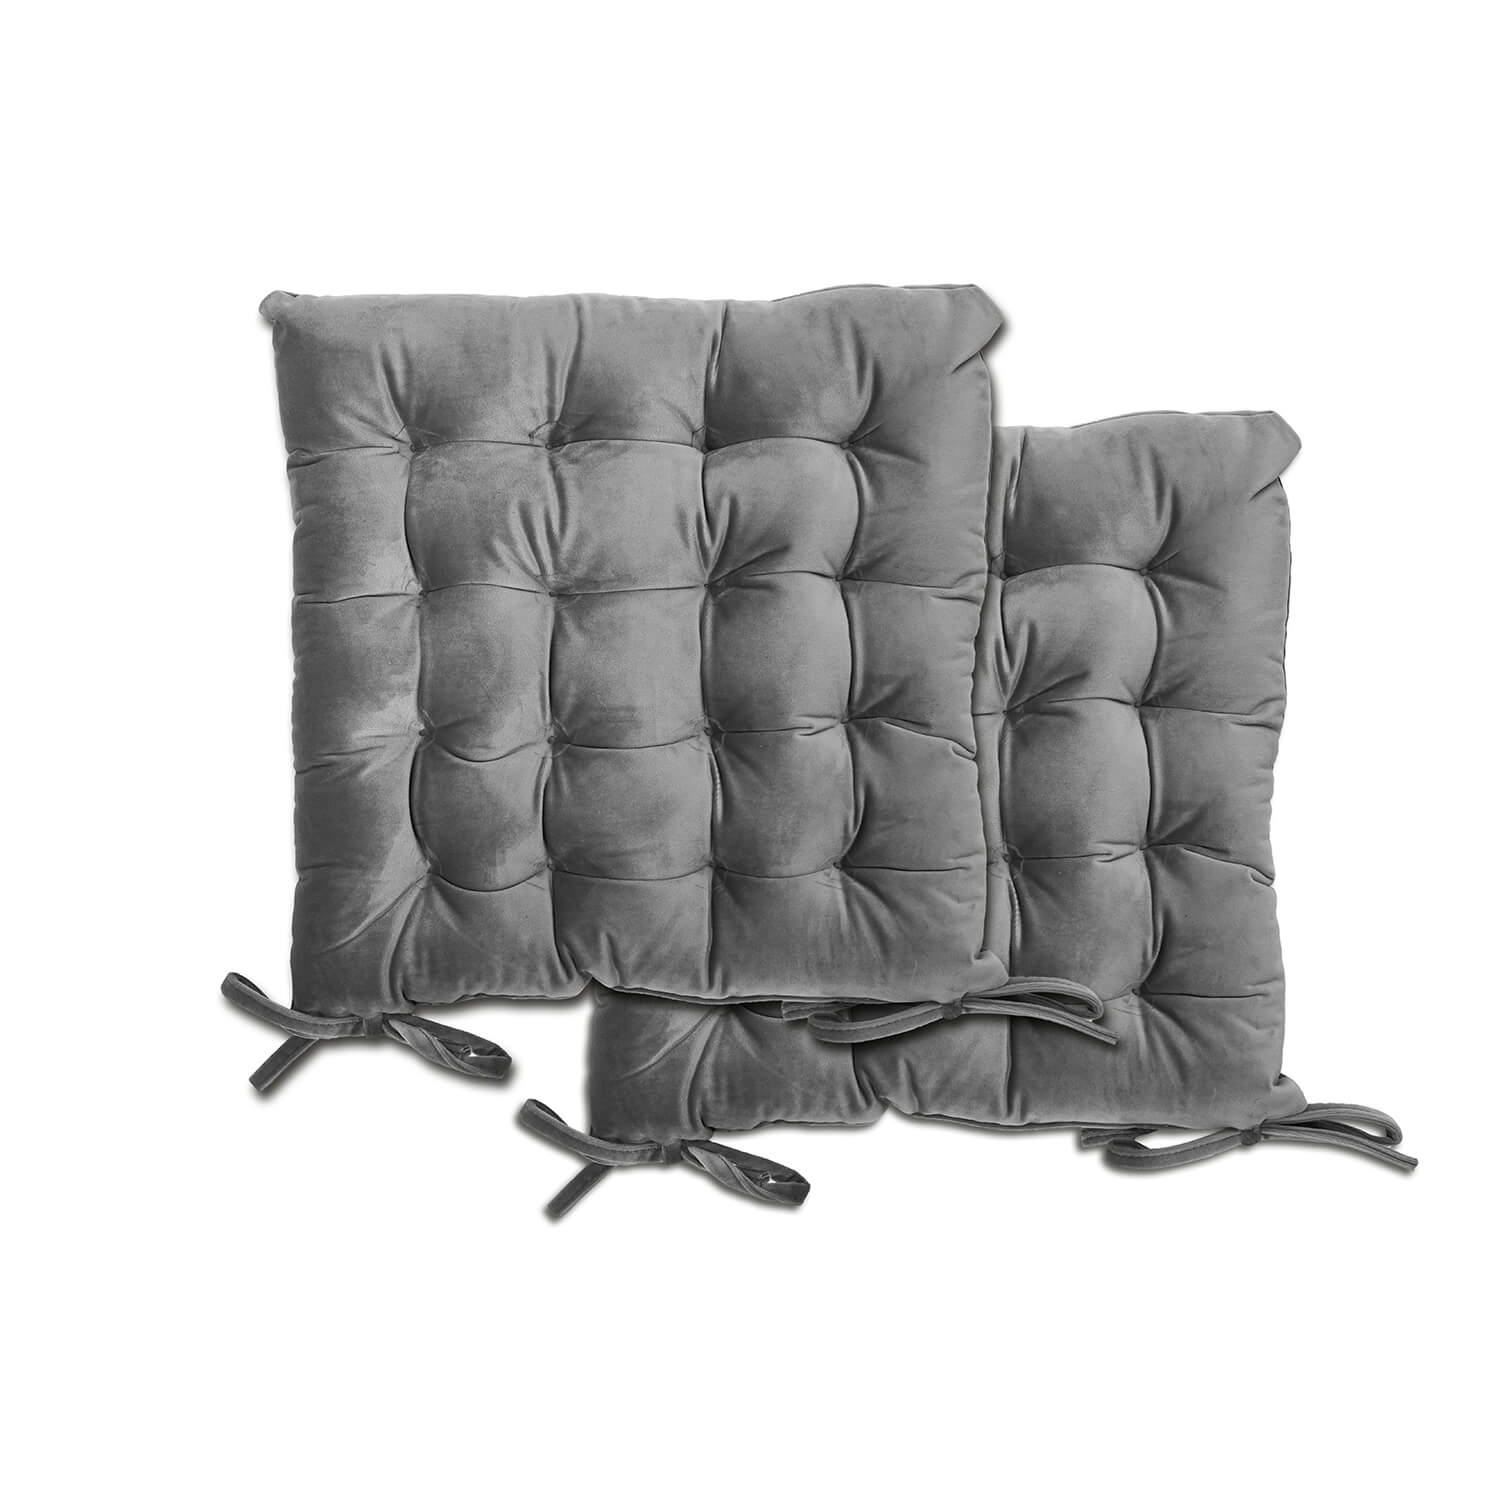 The Home Velvet Holland Seat Pad - Silver 1 Shaws Department Stores